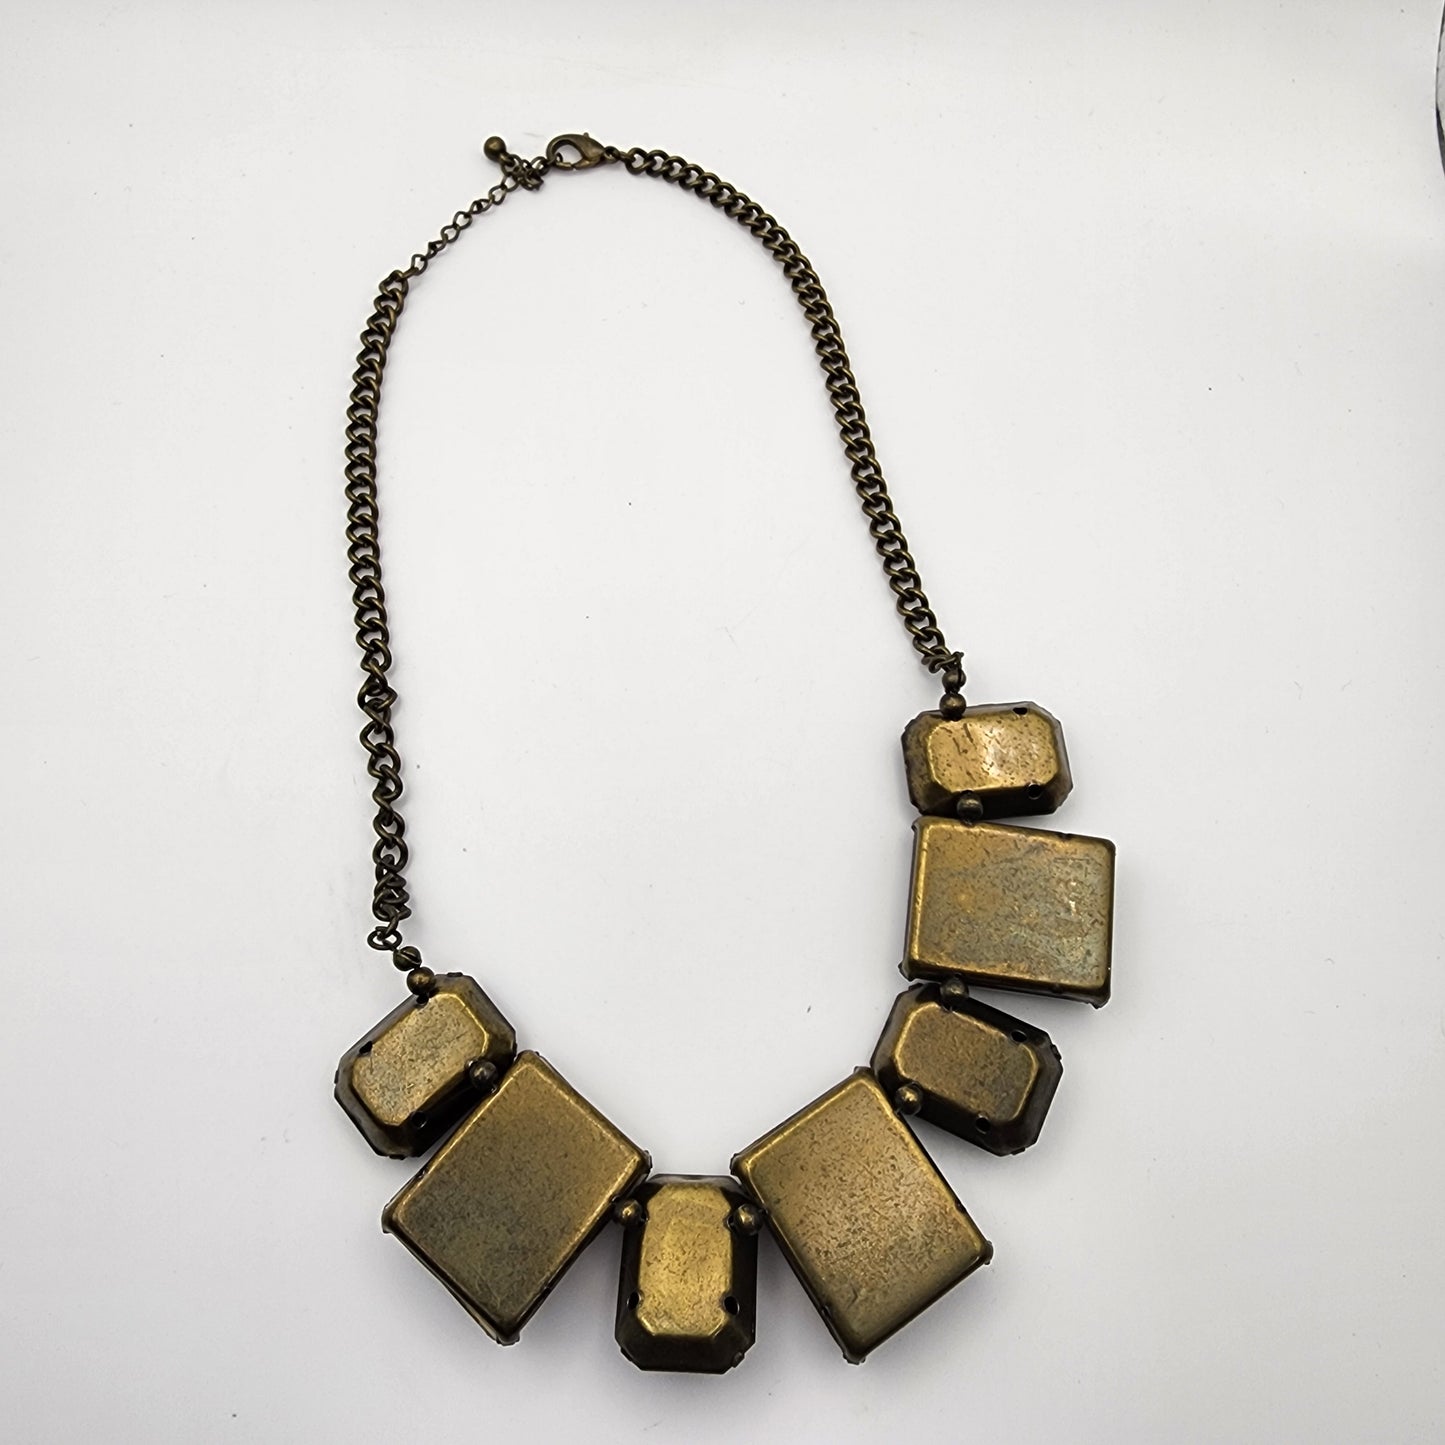 Vintage Black and Amber Fashion Necklace